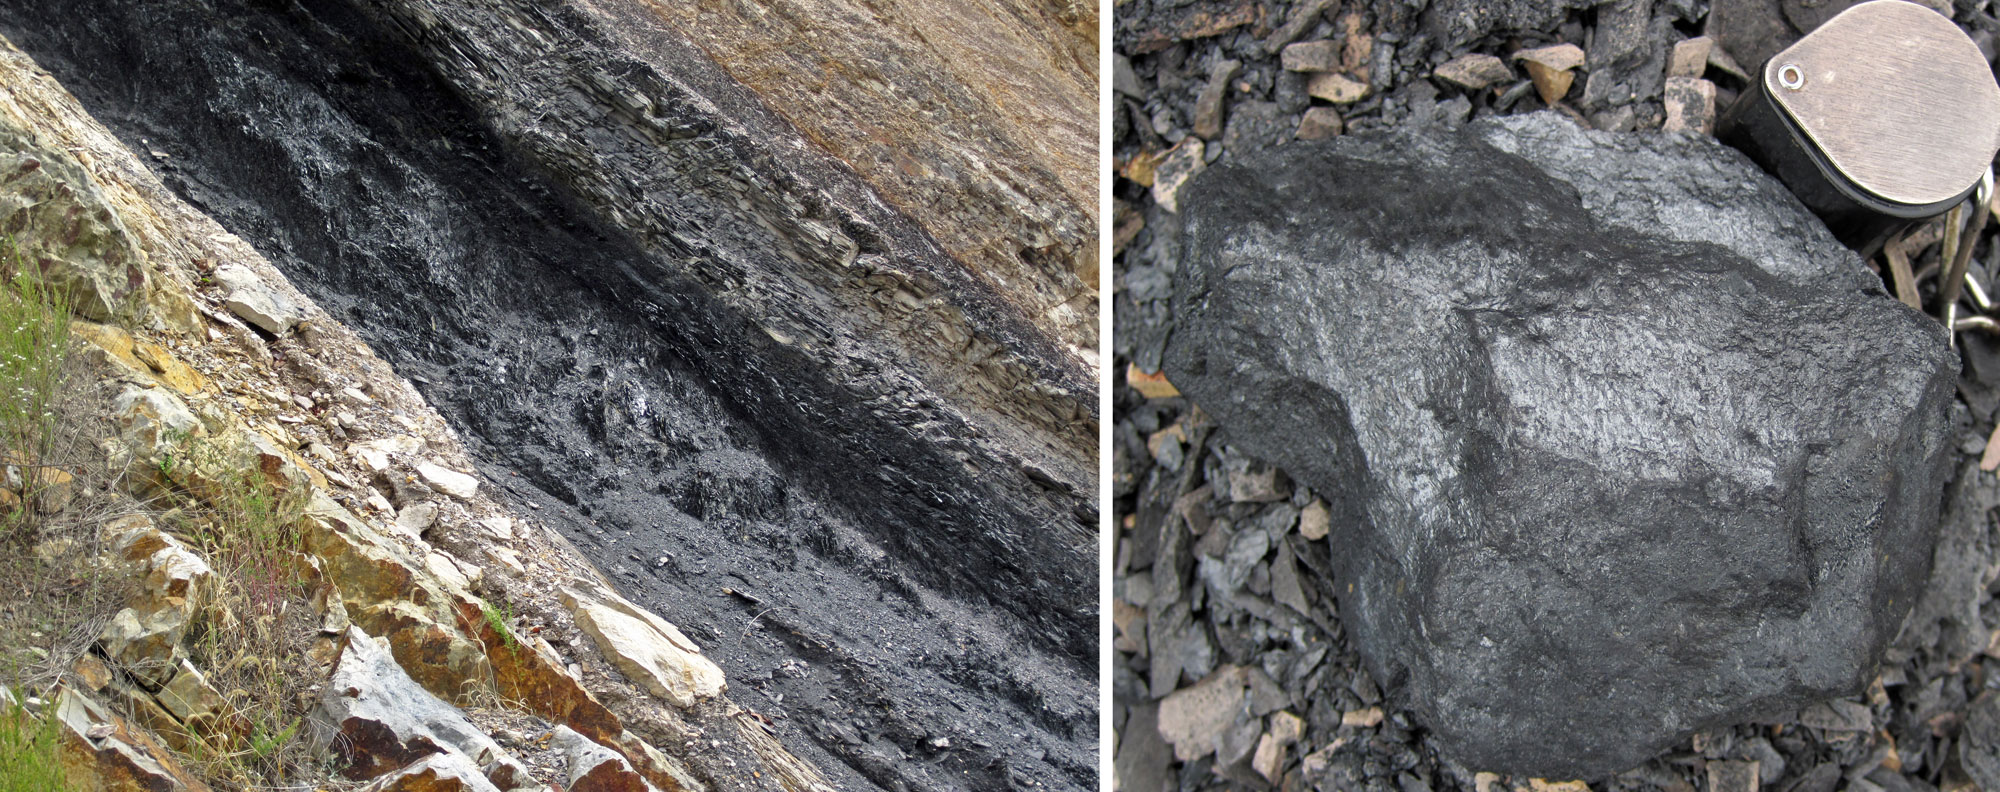 2-Panel image showing photos of Mississippian coal in Virginia. Panel 1: Photo of a coal layer in a roadcut. Panel 2: A chunk of semi-anthracite coal.